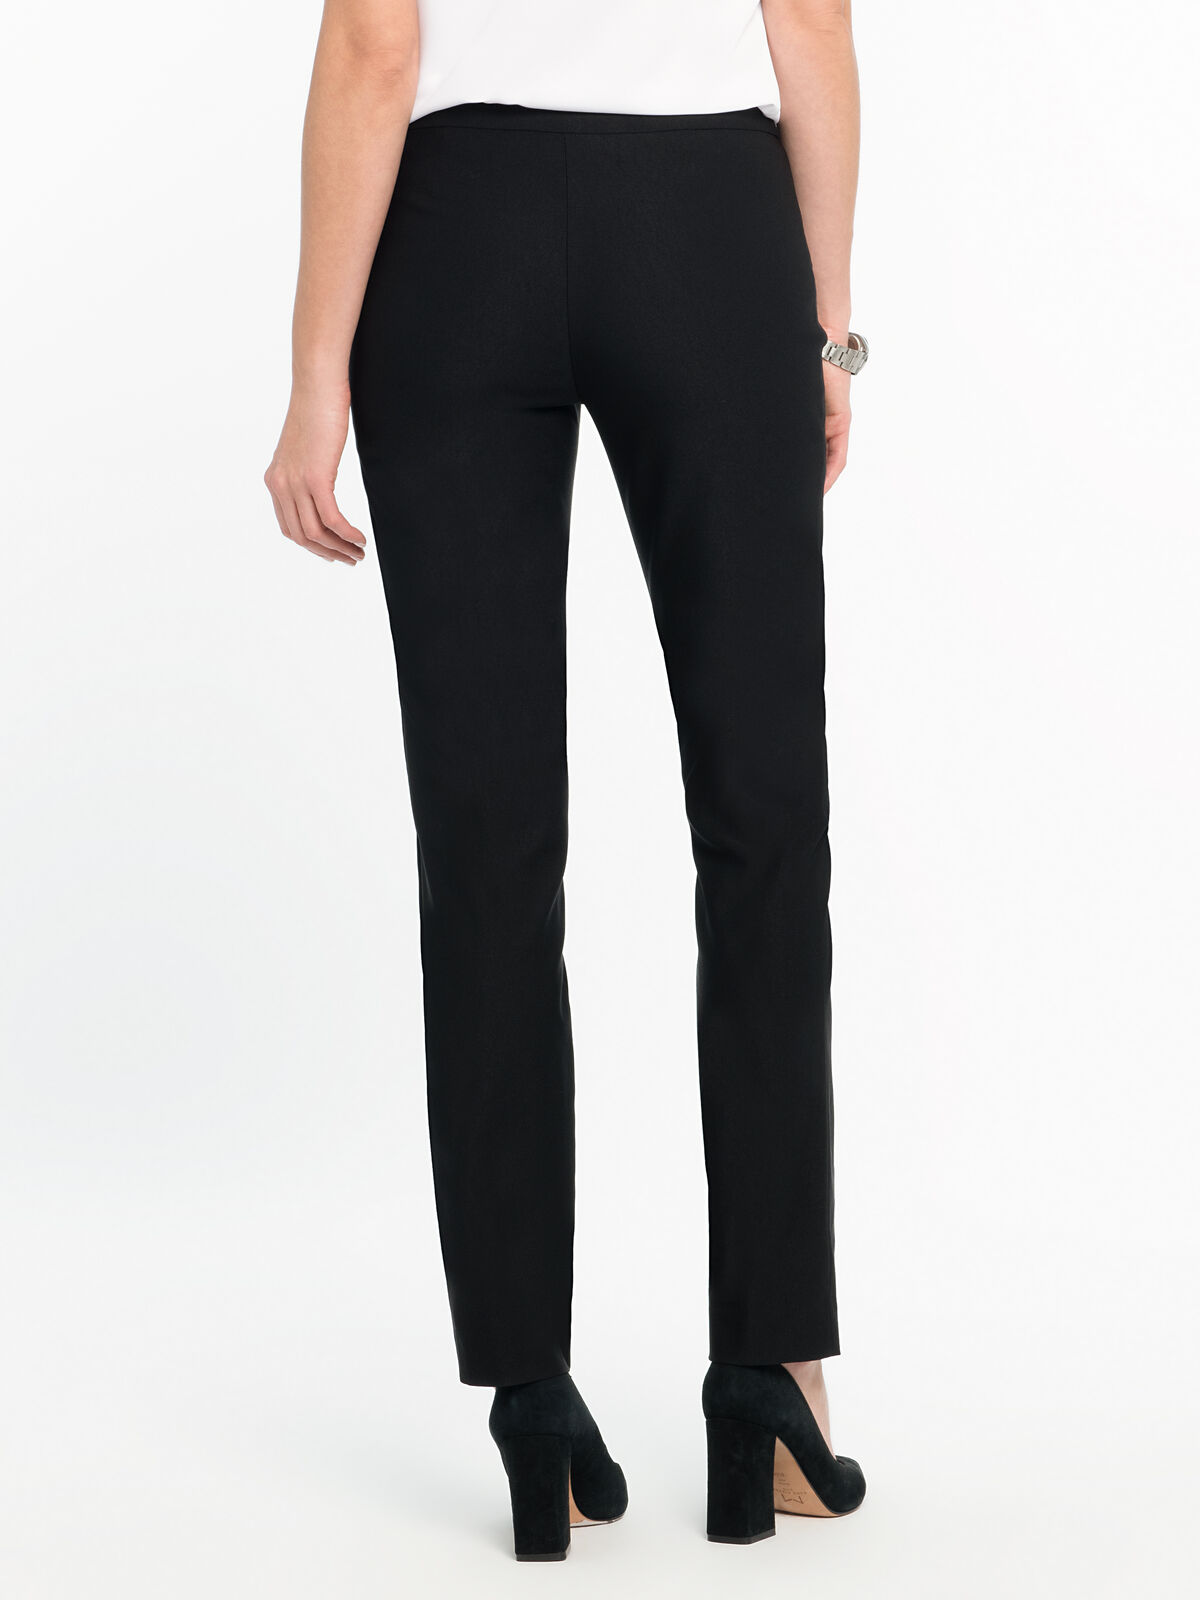 Fly Front Wonderstretch Pant | NIC+ZOE